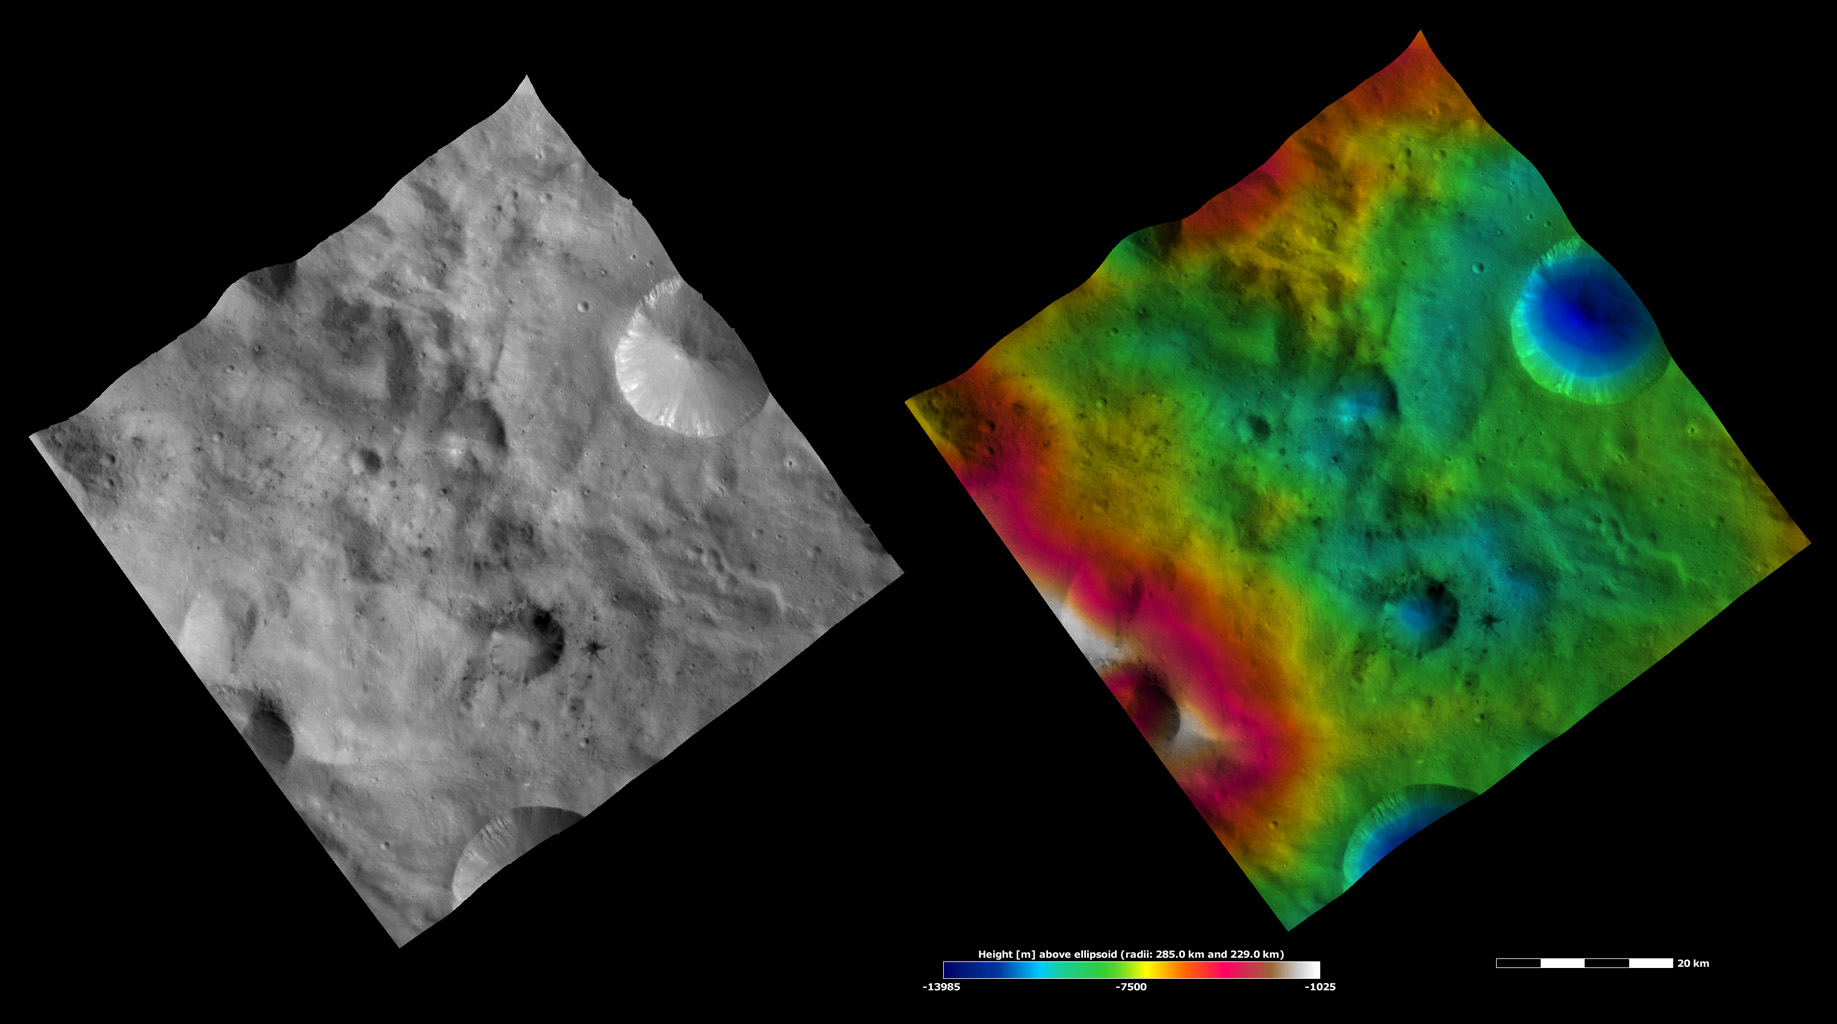 Apparent Brightness and Topography Images of Laelia Crater